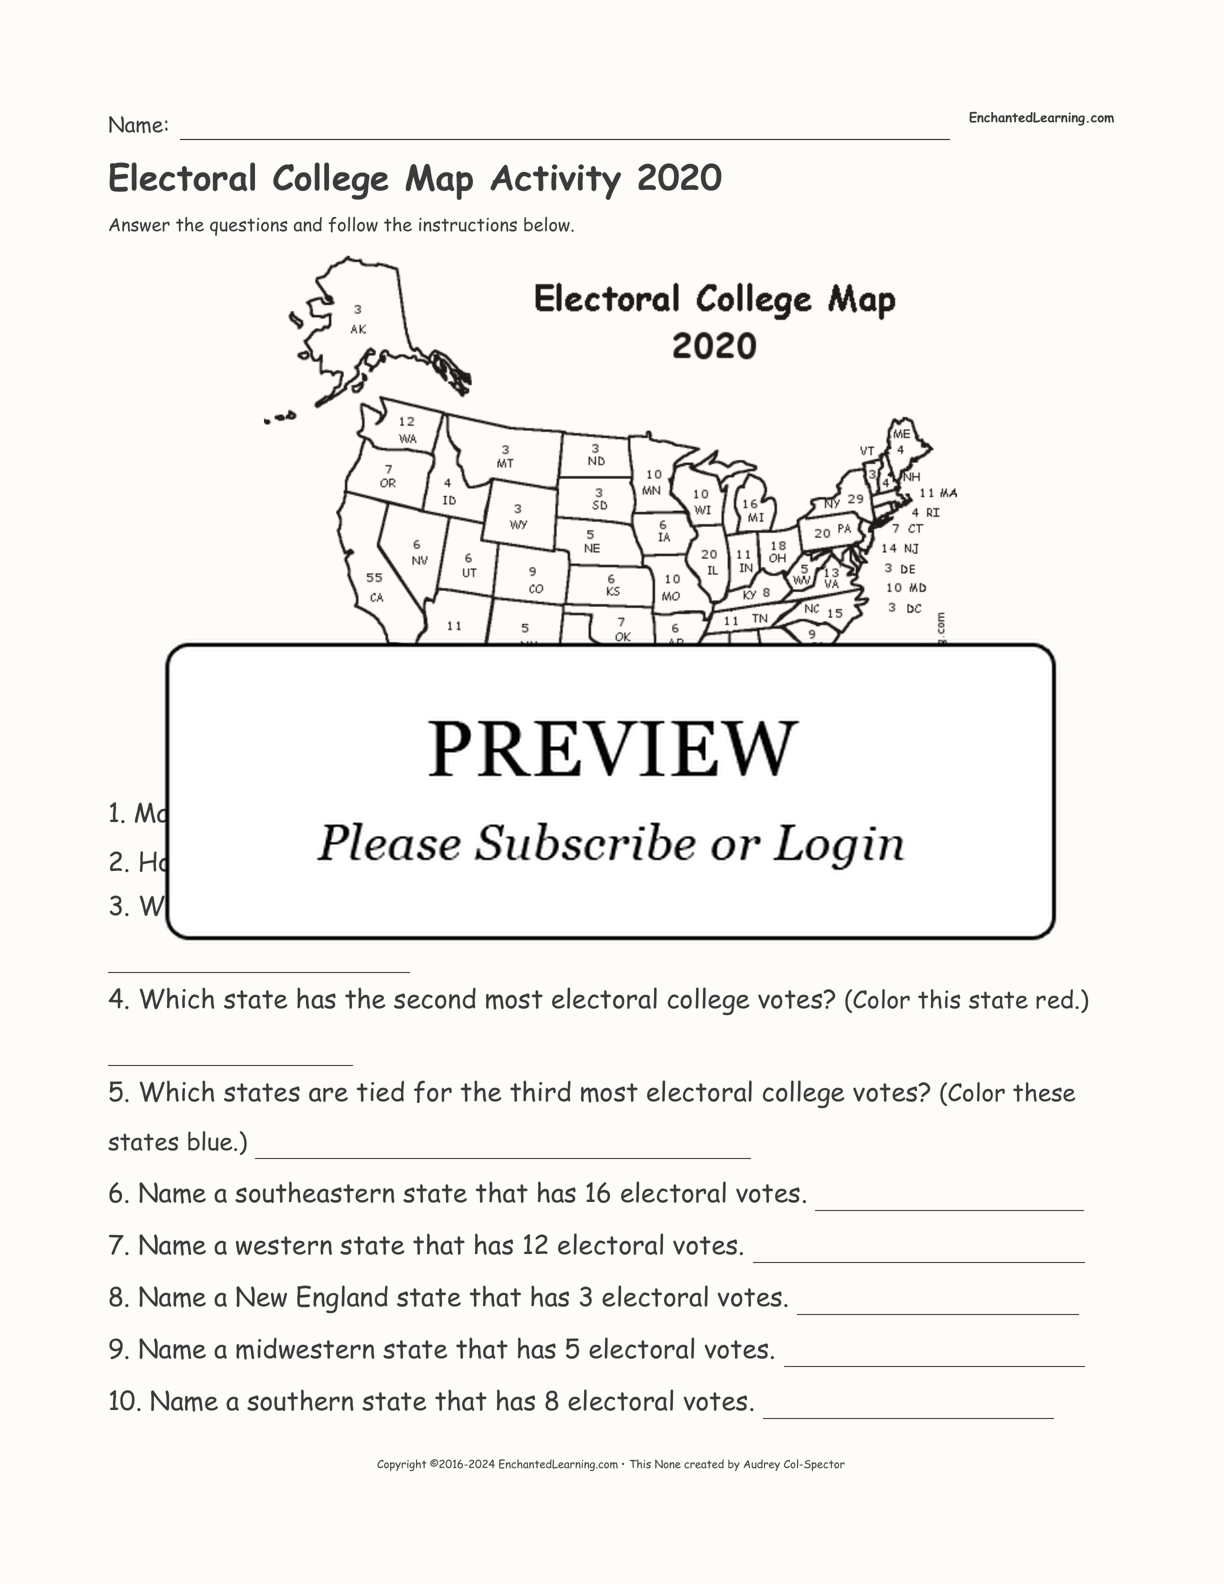 Electoral College Map Activity 2020 interactive worksheet page 1